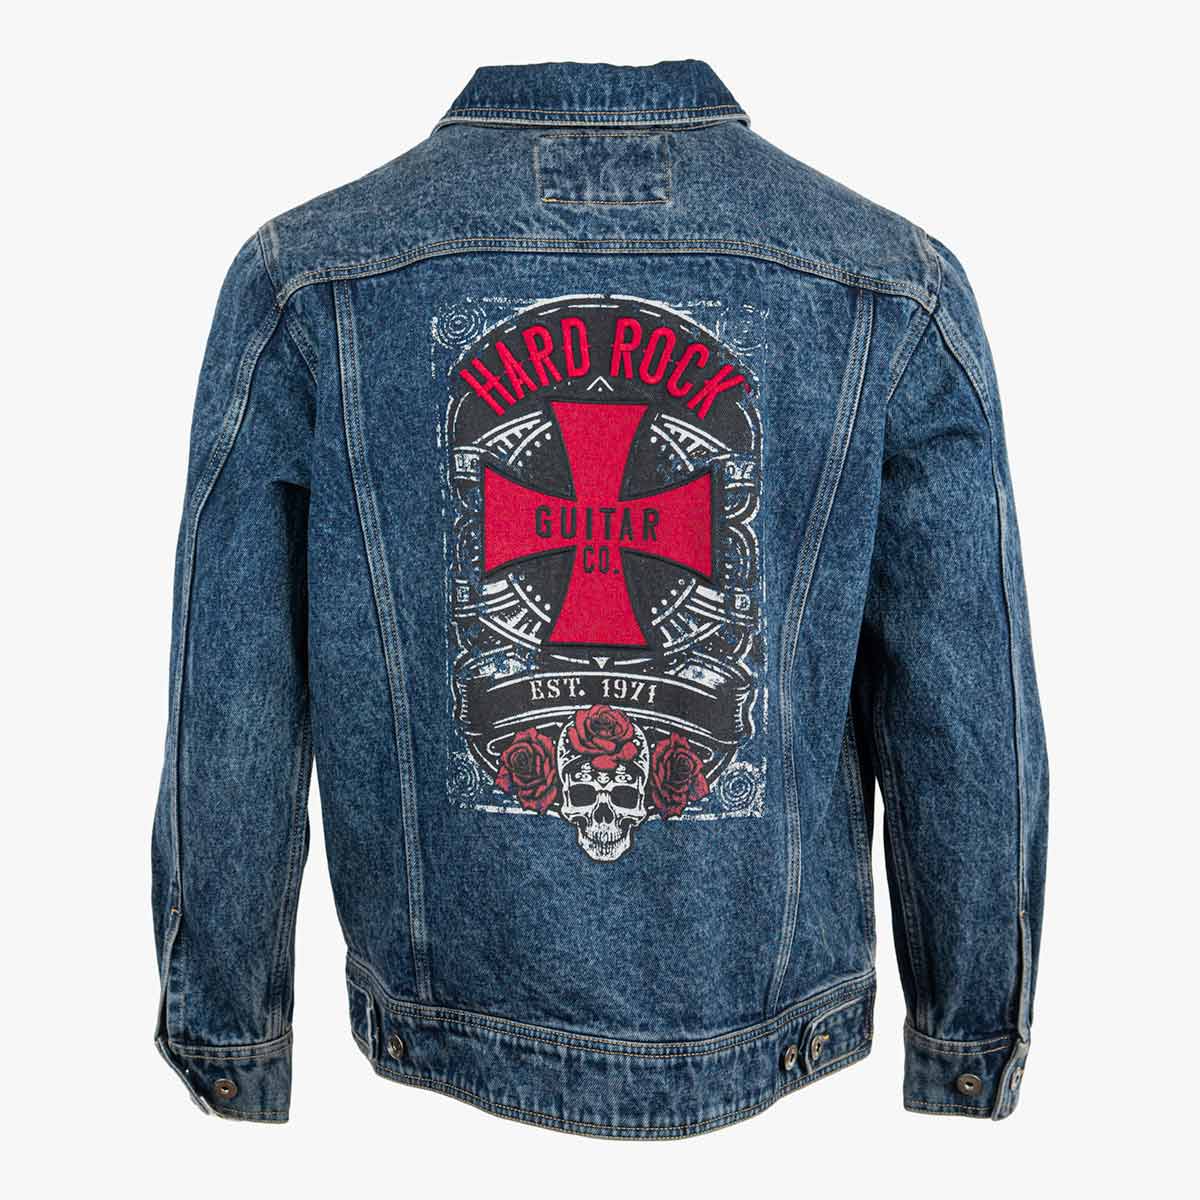 Guitar Company Denim Jacket with Cross Skull Roses image number 1